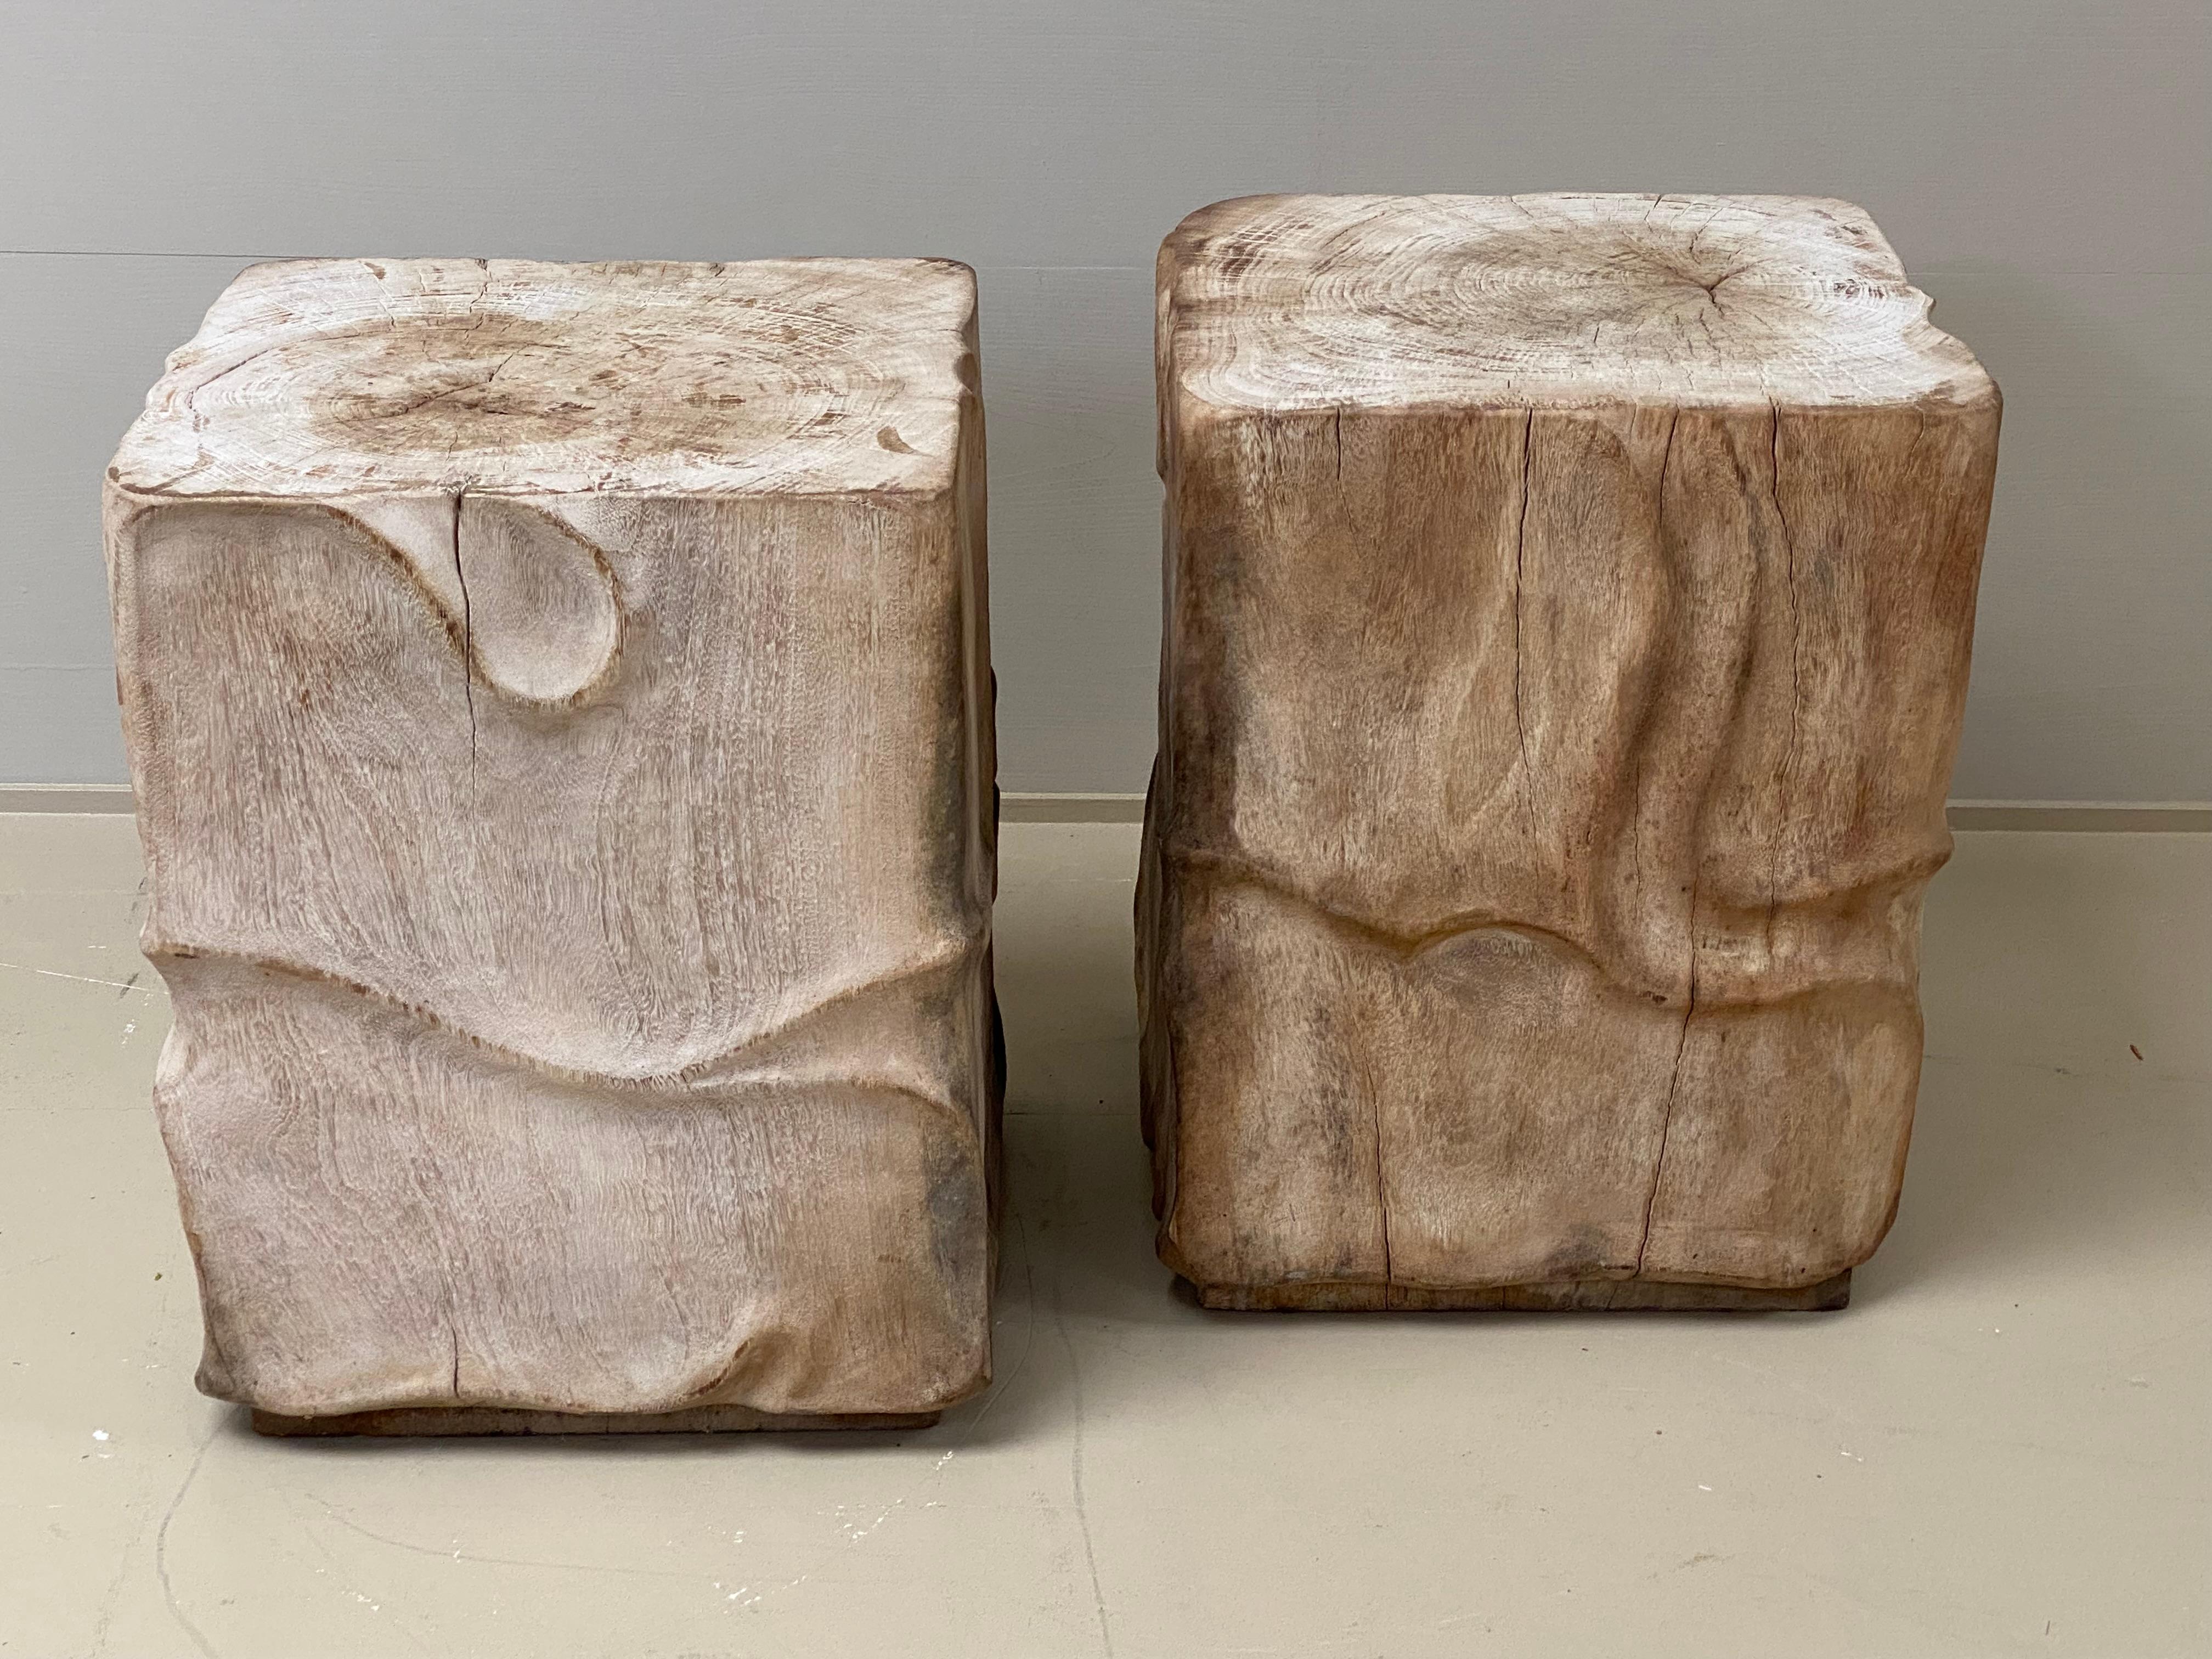 Beautiful pair of Wooden Stools/Tables in a bleached SUAR wood,
Great blond/greyish patina and a warm and worn finish of the wood,
Can be used as tables or stools, multifunctional objects,
Nice stylish linear carvings.